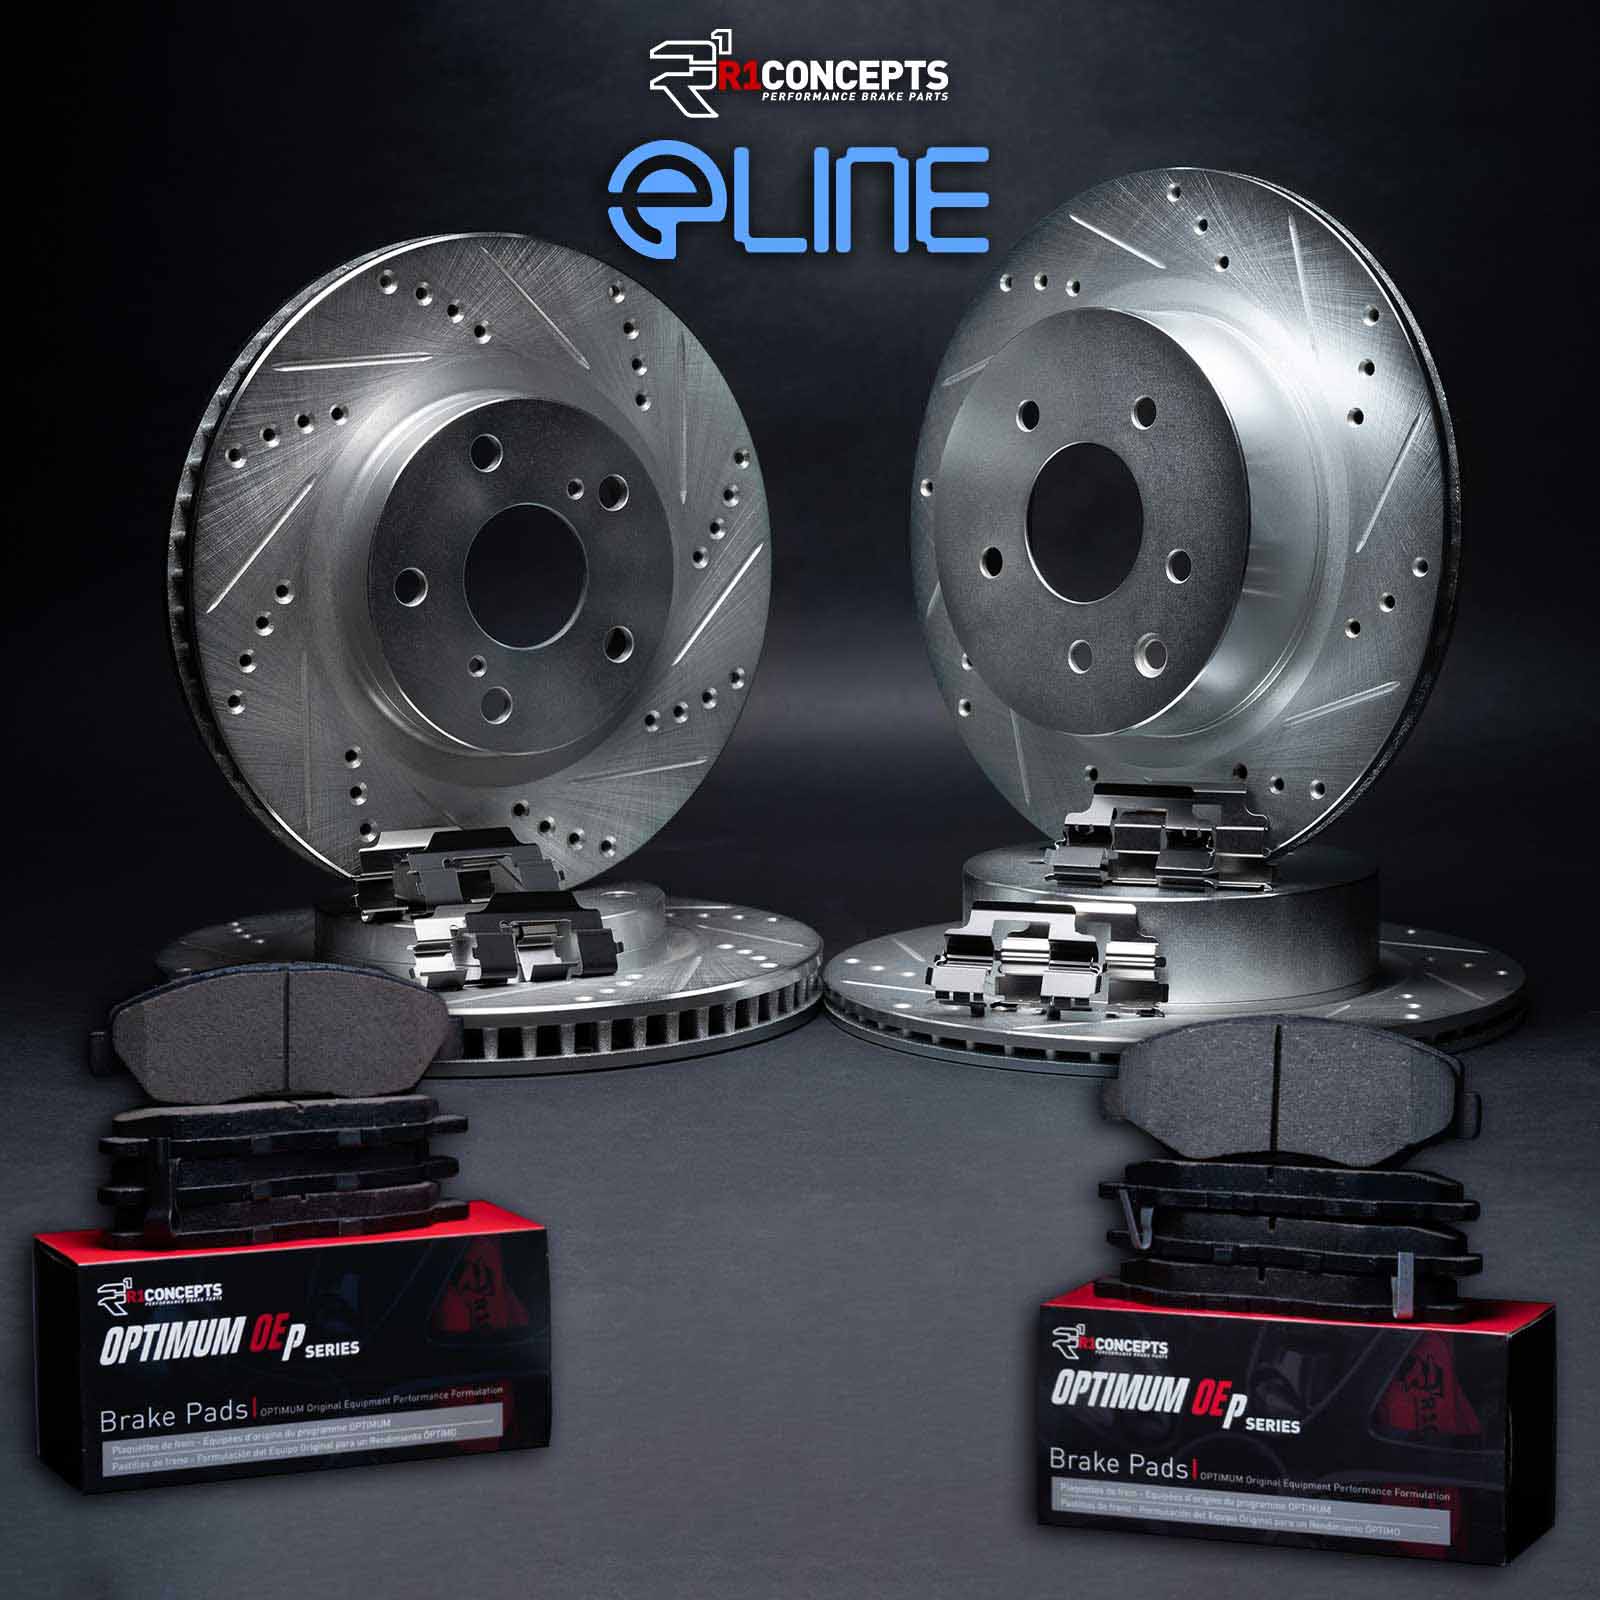 R1 Concepts WGUH2-72043 R1 Concepts Silver Drilled Slotted Rotors with 5000 Oep Brake Pads & Hdw